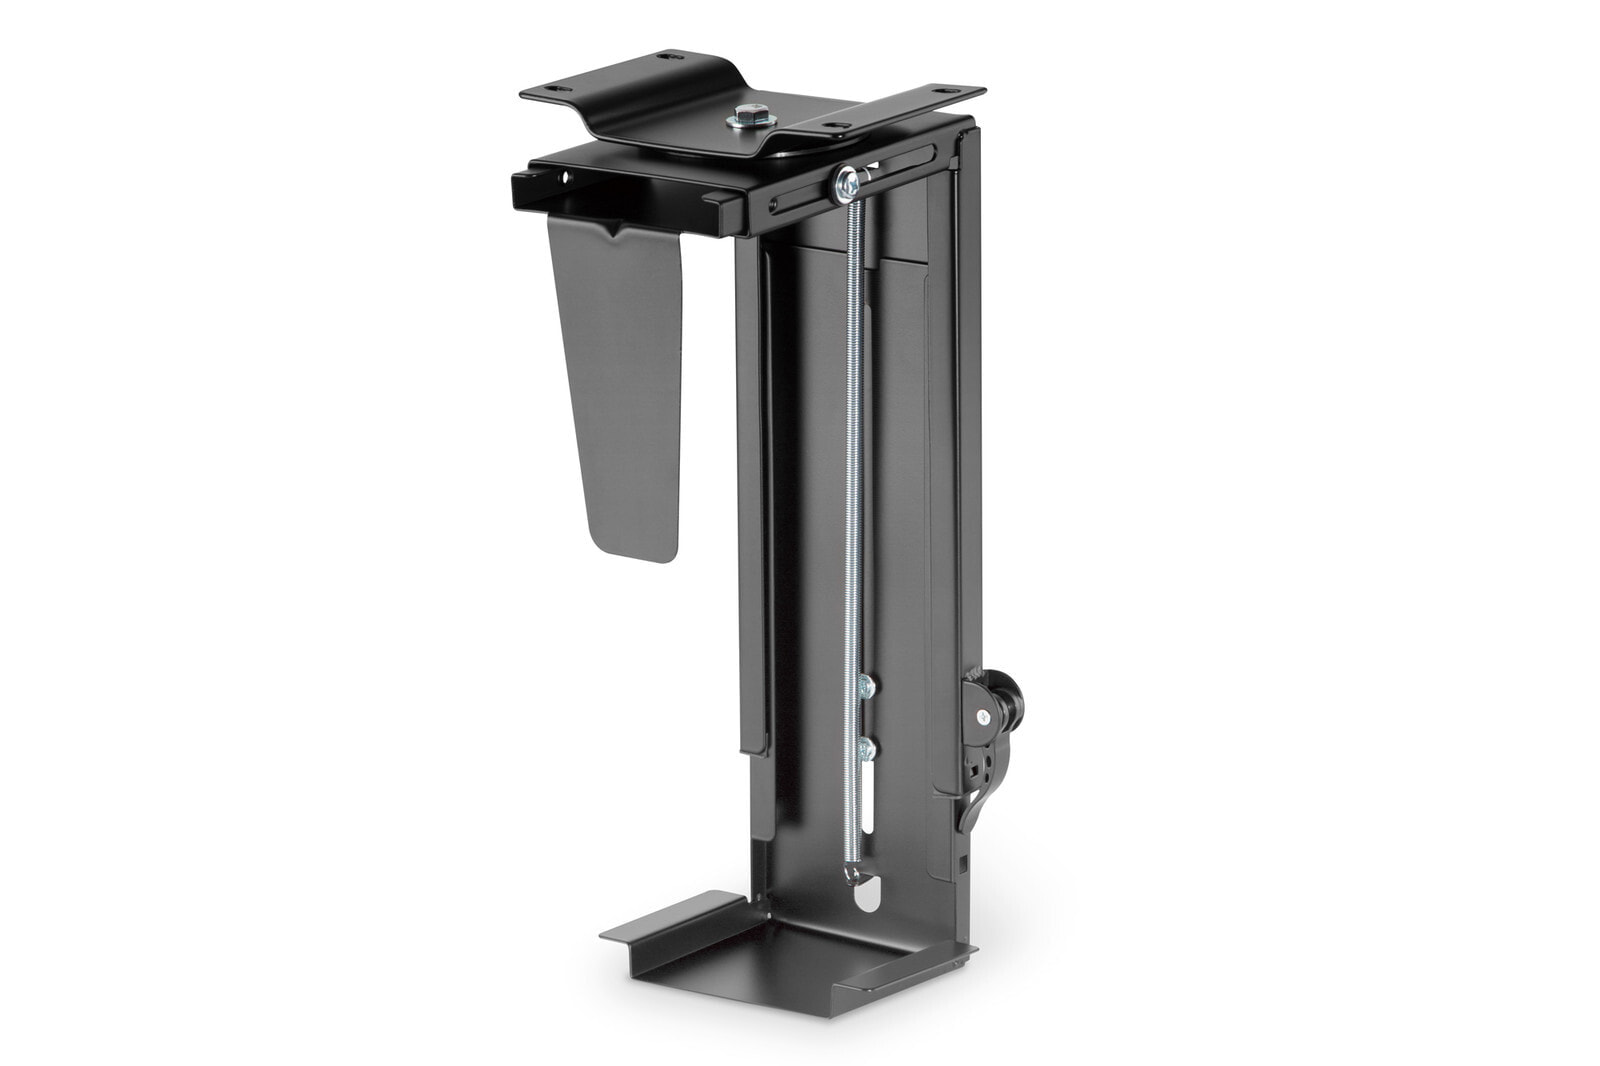 DIGITUS Universal PC Mount for Desk Mounting with Easy-Locking